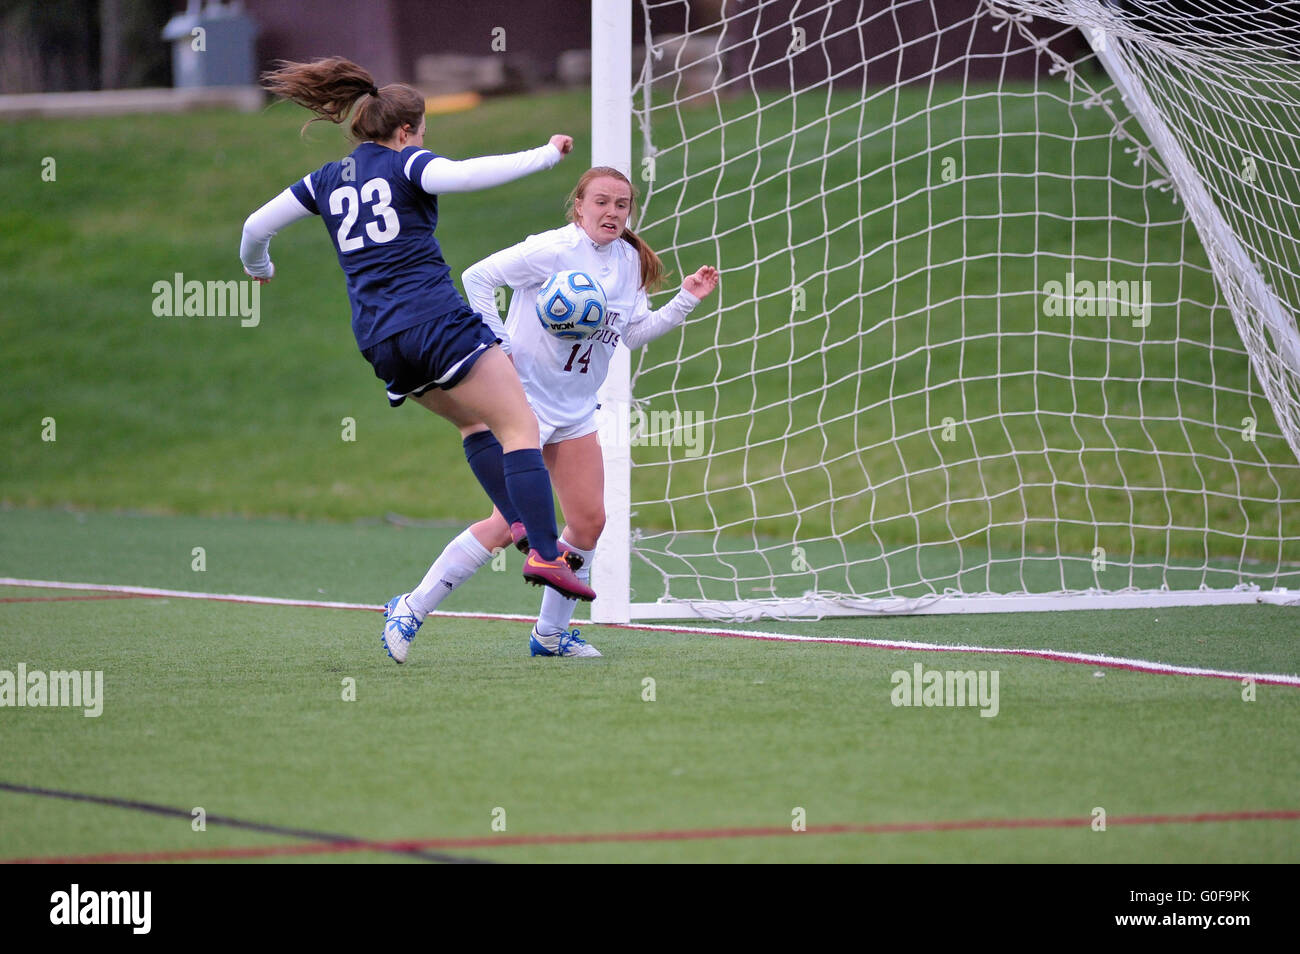 With the keeper well out of the net a player leaves her feet to score into a virtually open net during a high school match. USA. Stock Photo